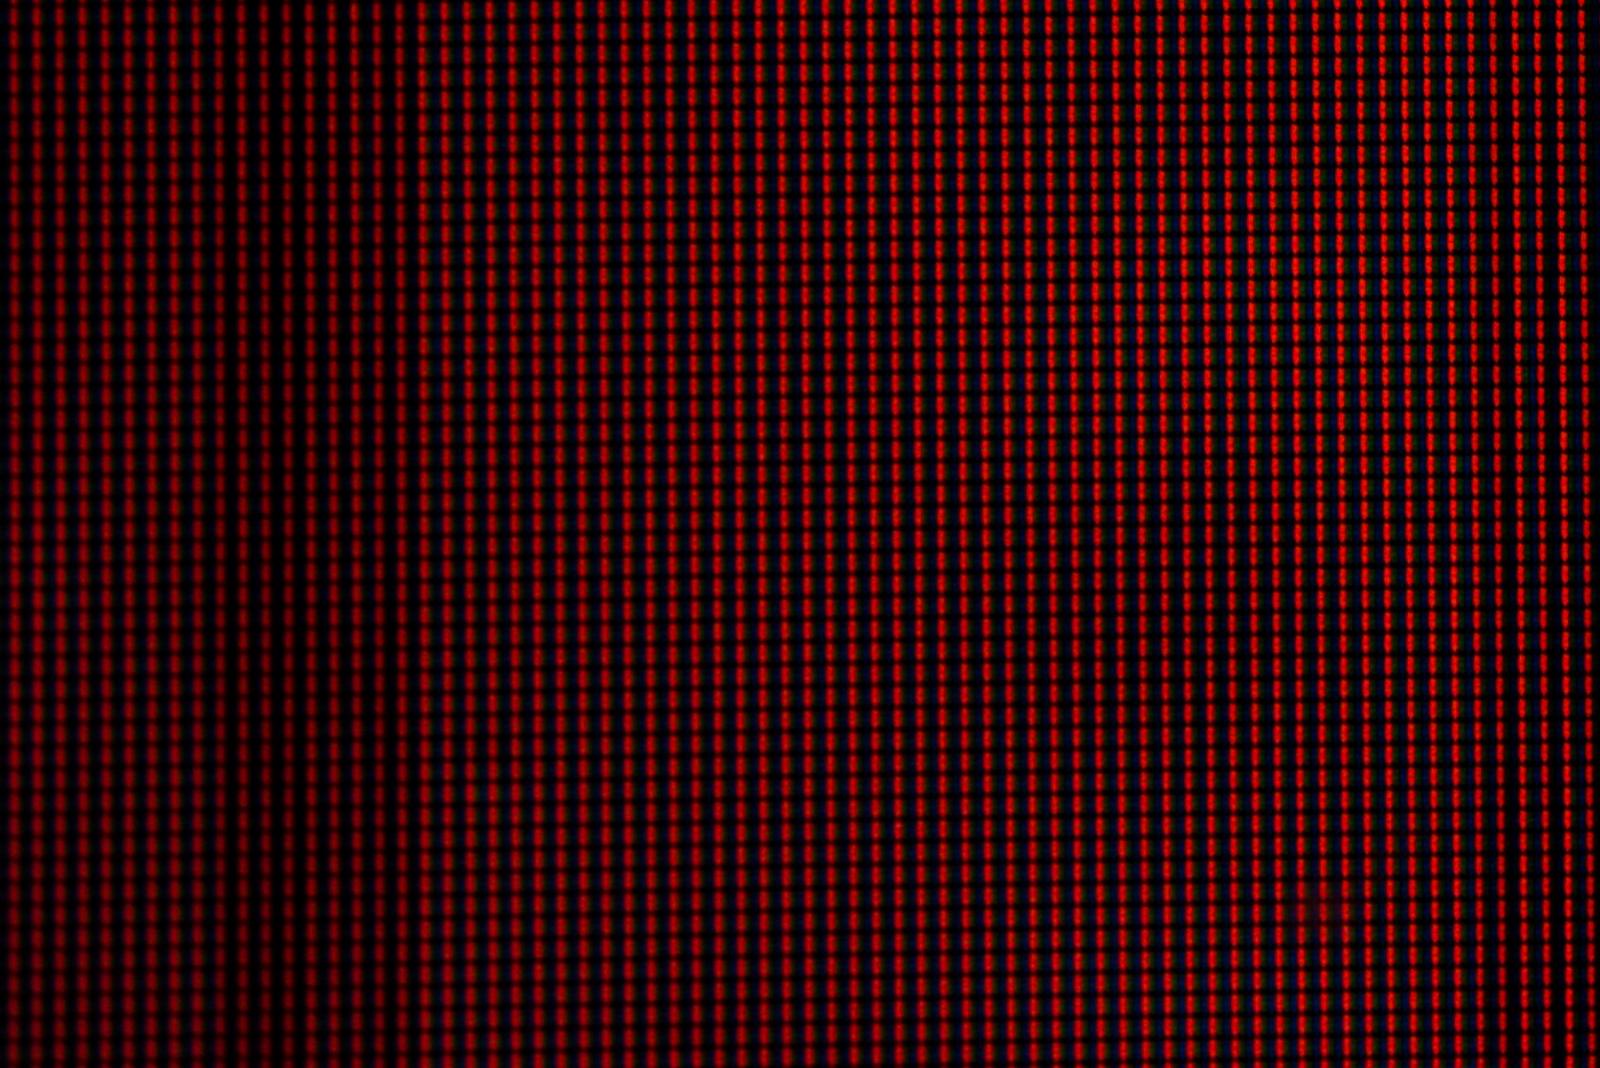 What I See - Red Pixel Field One.